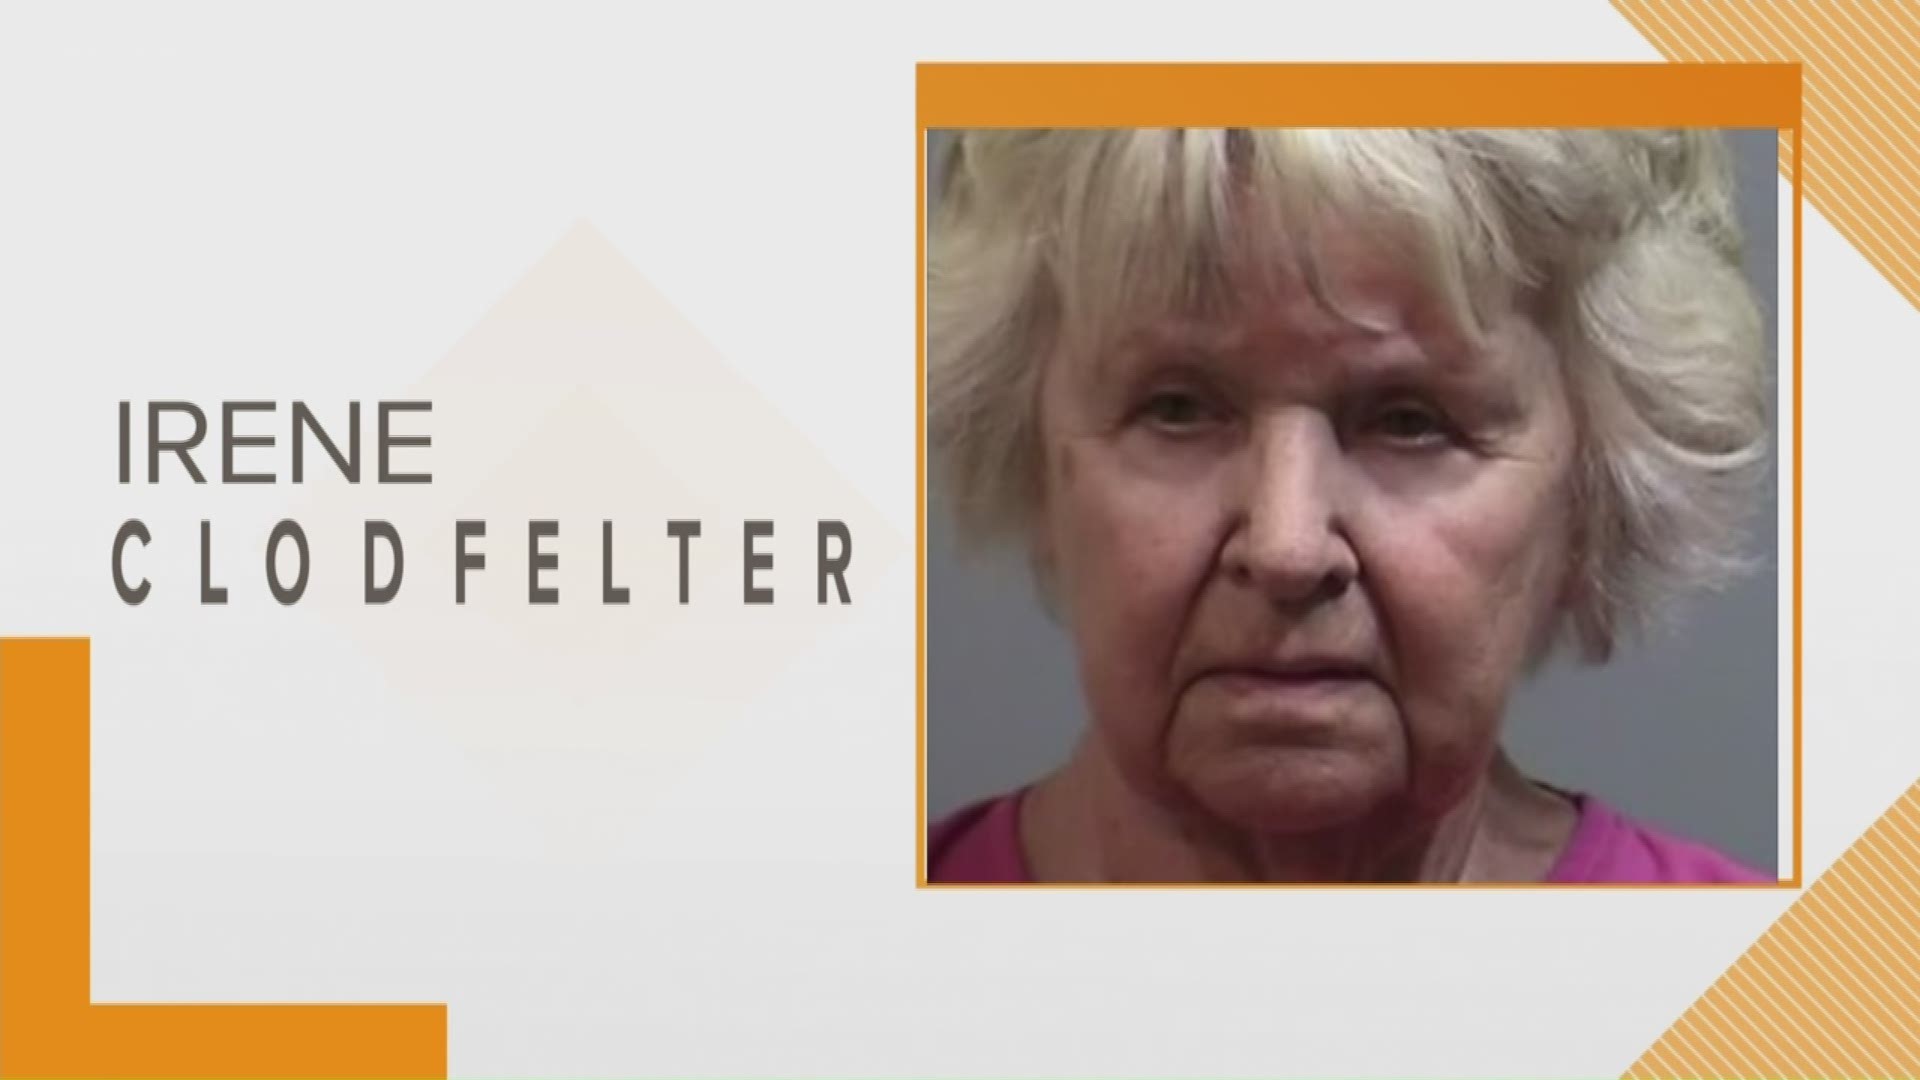 Authorities confirm that a trash bag was found under Irene Clodfelter's house containing the remains of her missing husband, Hurbert. The trash bag was found by his two daughters, who said they had not seen him for two years.